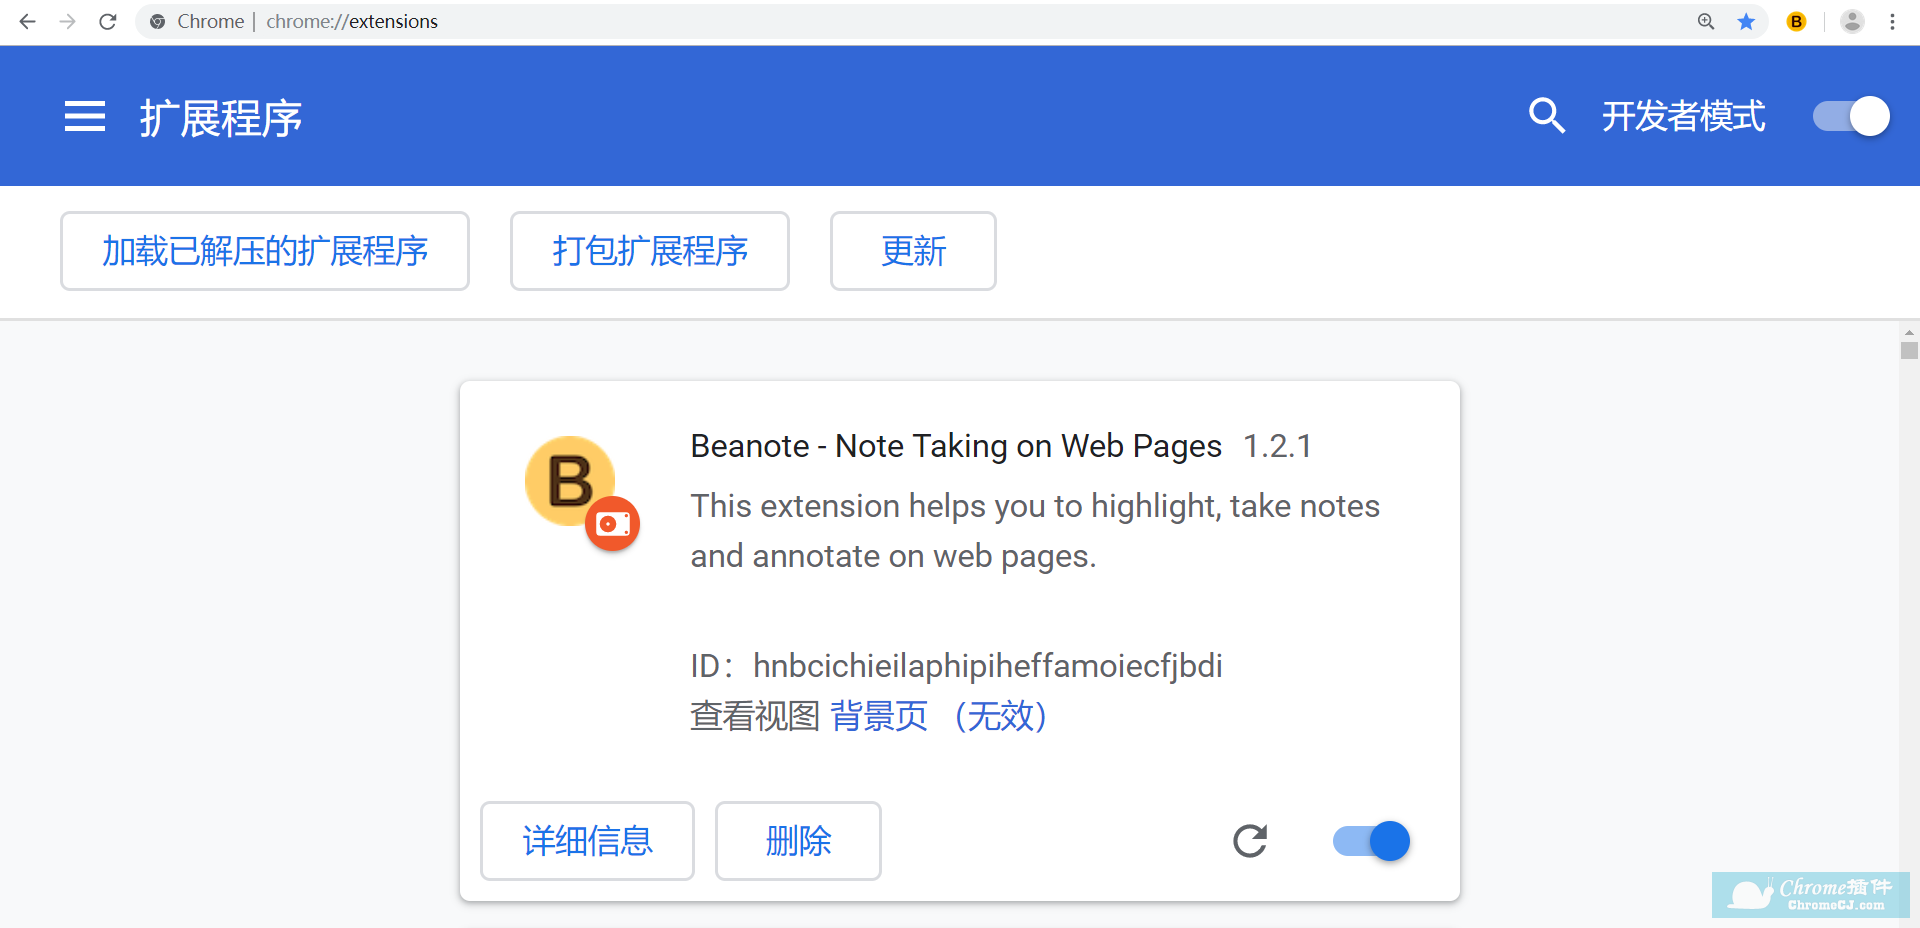 Beanote - Note Taking on Web Pages插件使用方法